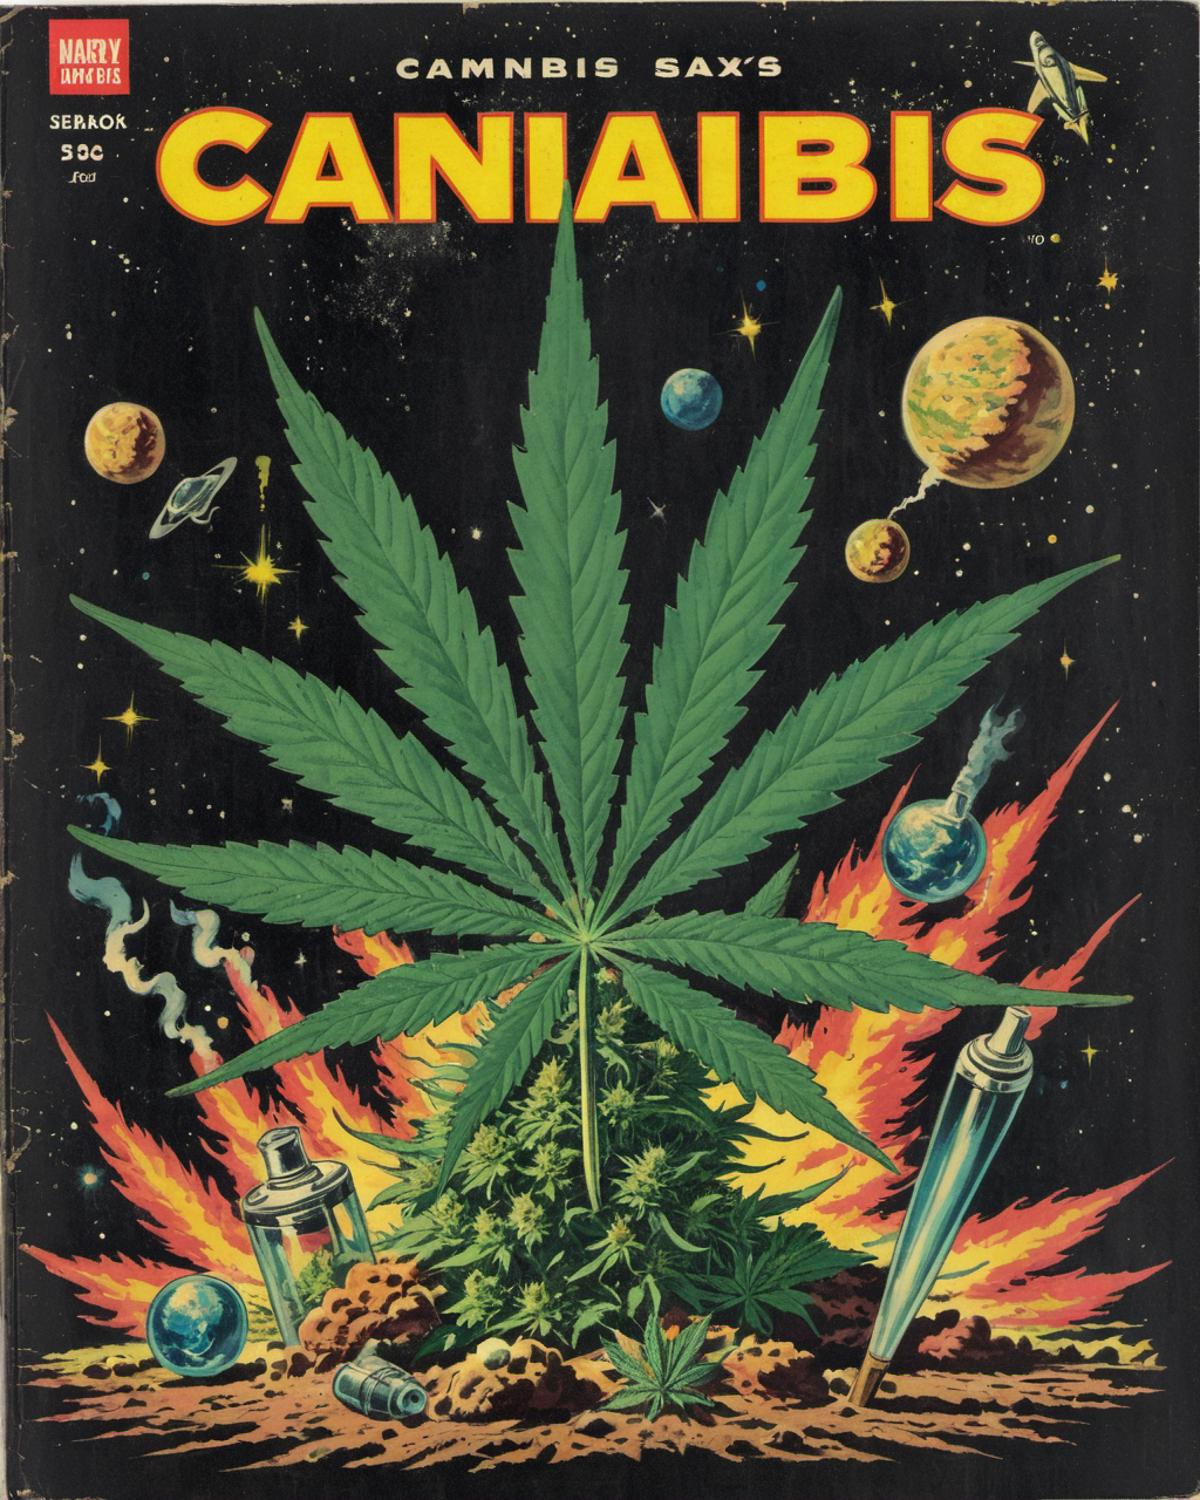 A vintage comic book cover featuring cannabis and planets.